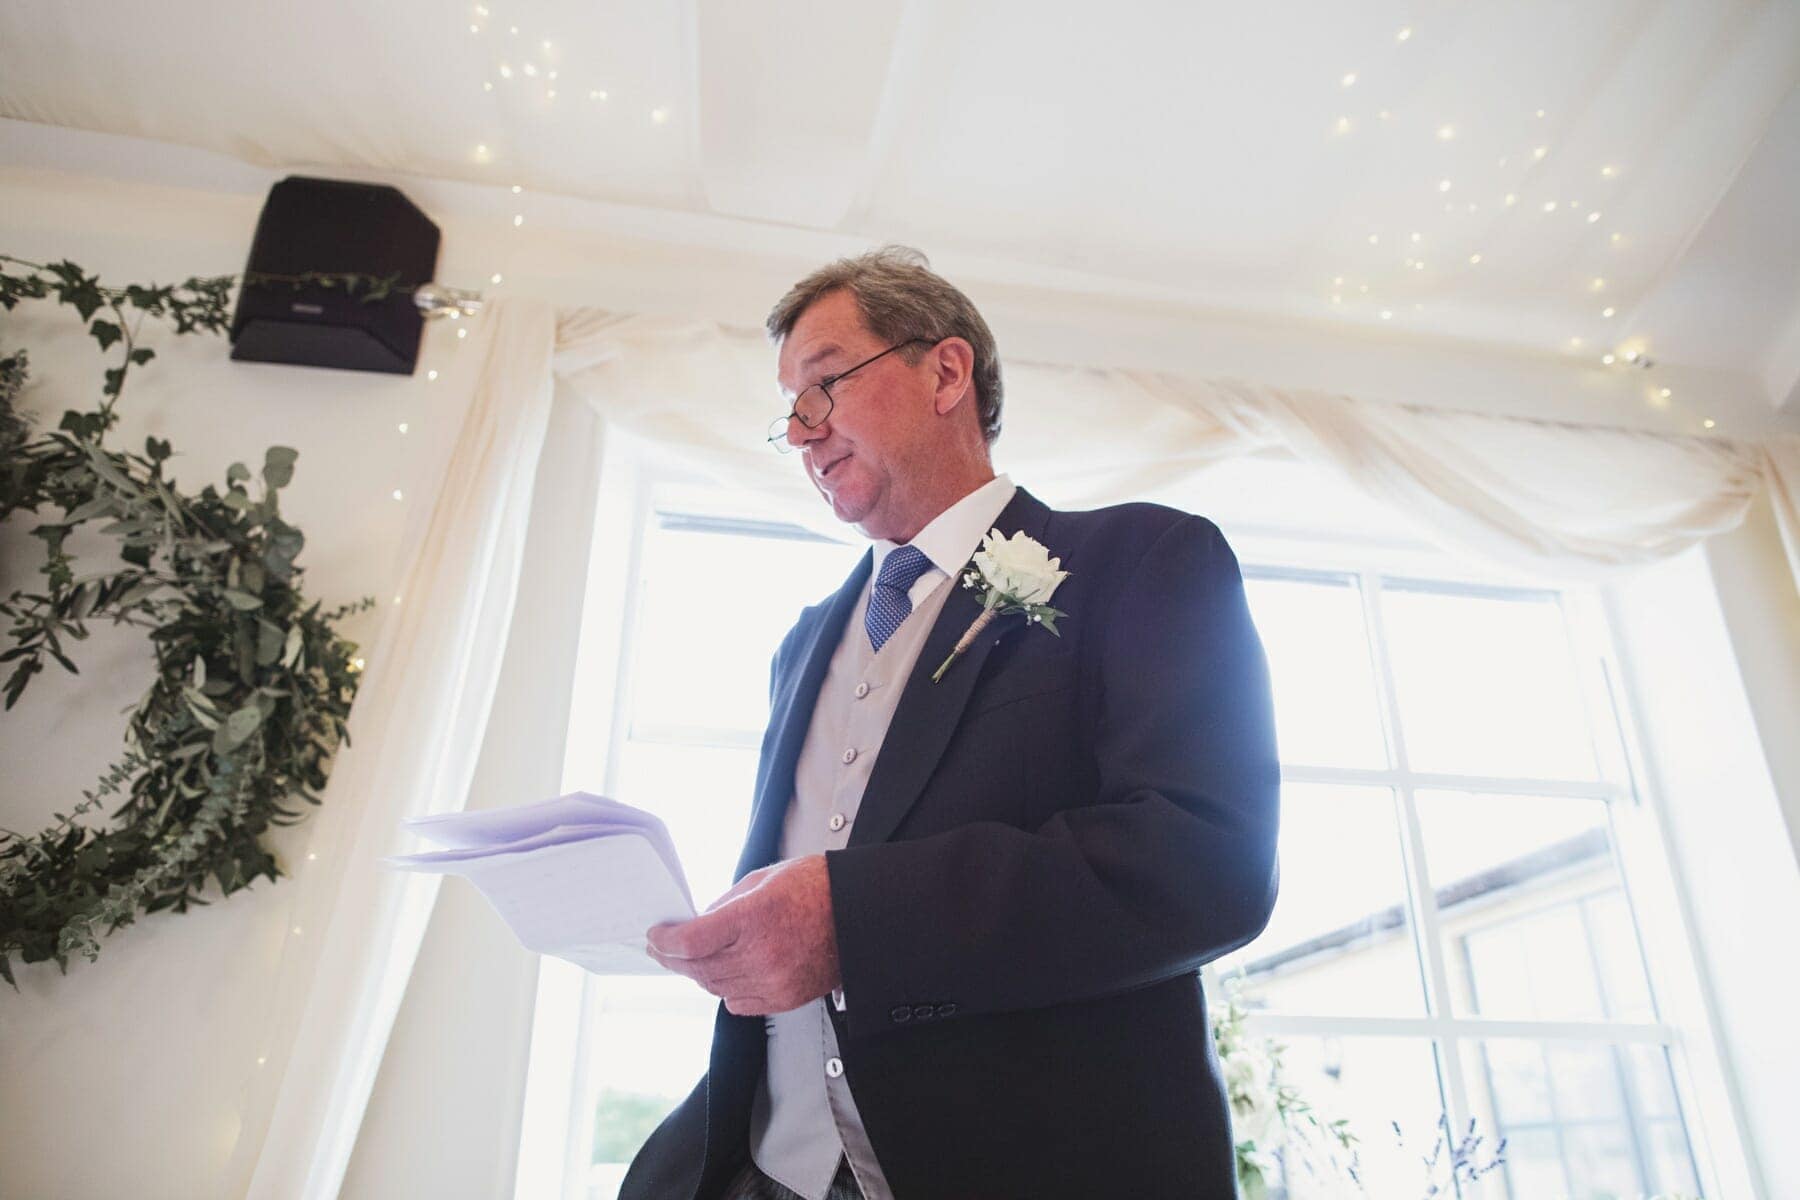 suffolk rustic and relaxed barn wedding speeches